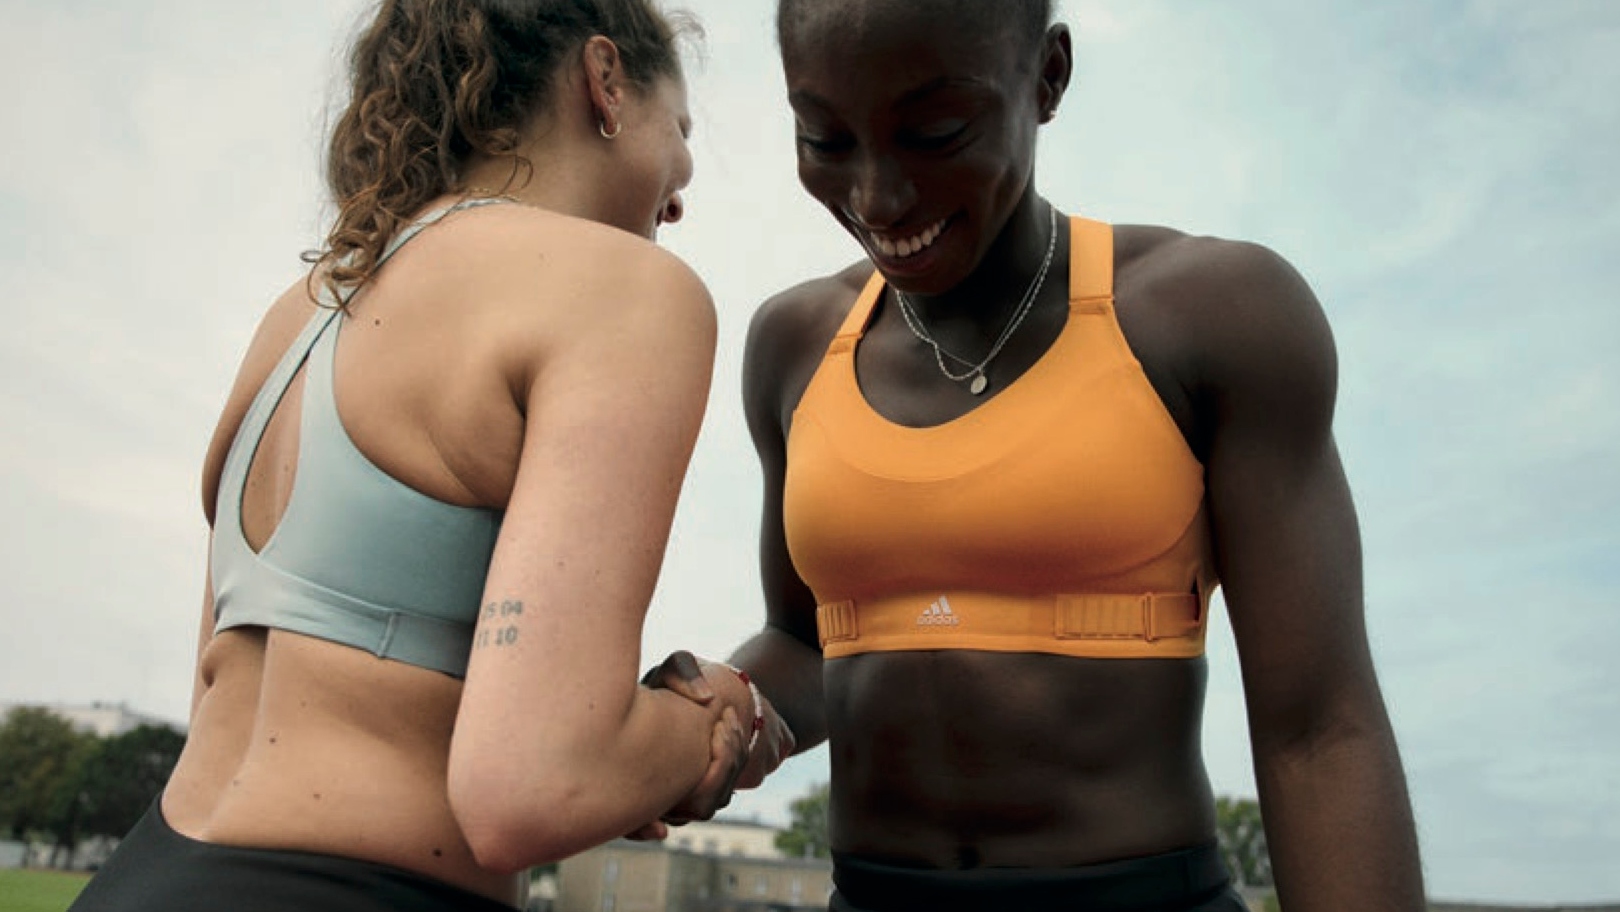 Walmart Launches Love & Sports, a New Activewear Brand